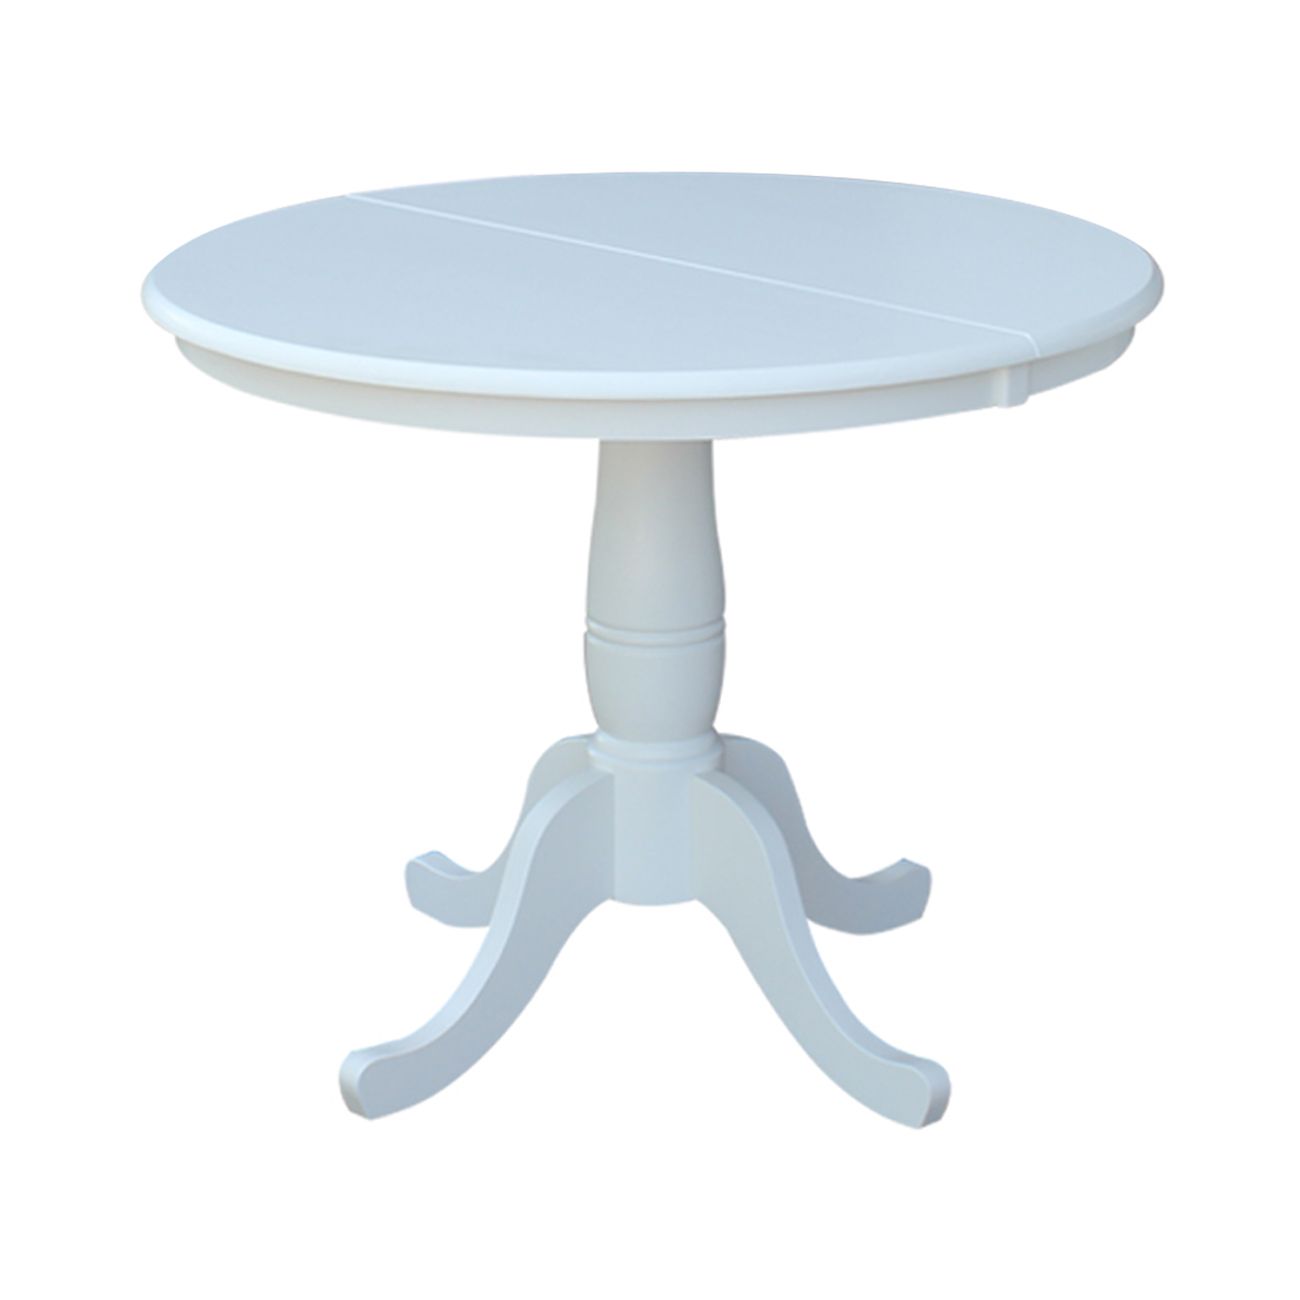 Popular Round Pedestal Dining Tables With One Leaf For 36" Round Top Pedestal Table With 12" Leaf –  (View 15 of 15)